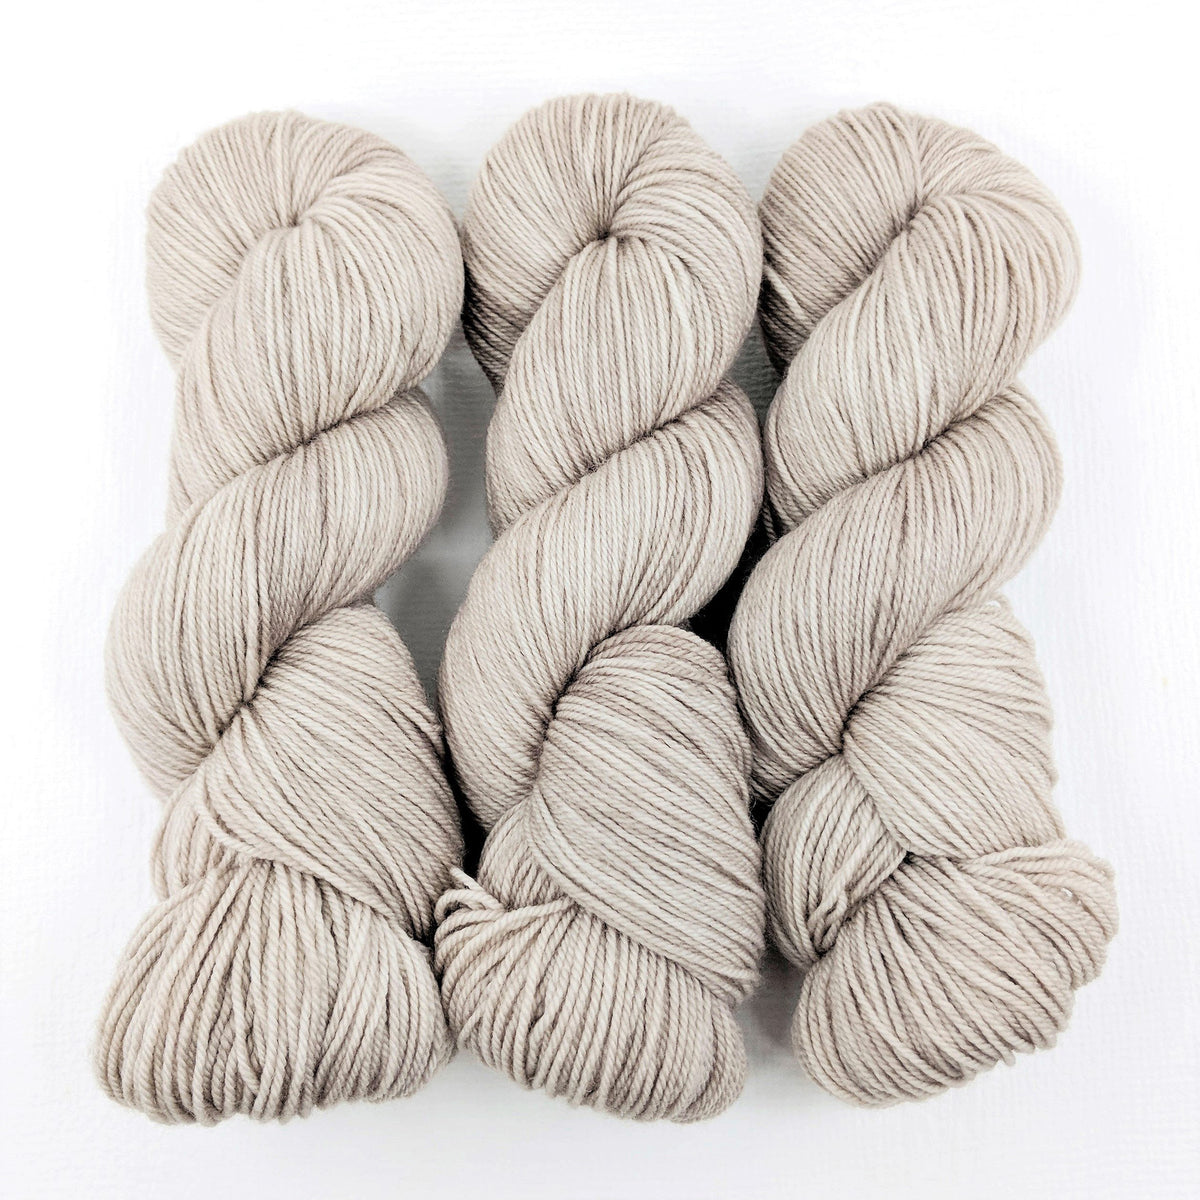 The Softer Side of Linen - Passion 8 Fingering - Dyed Stock